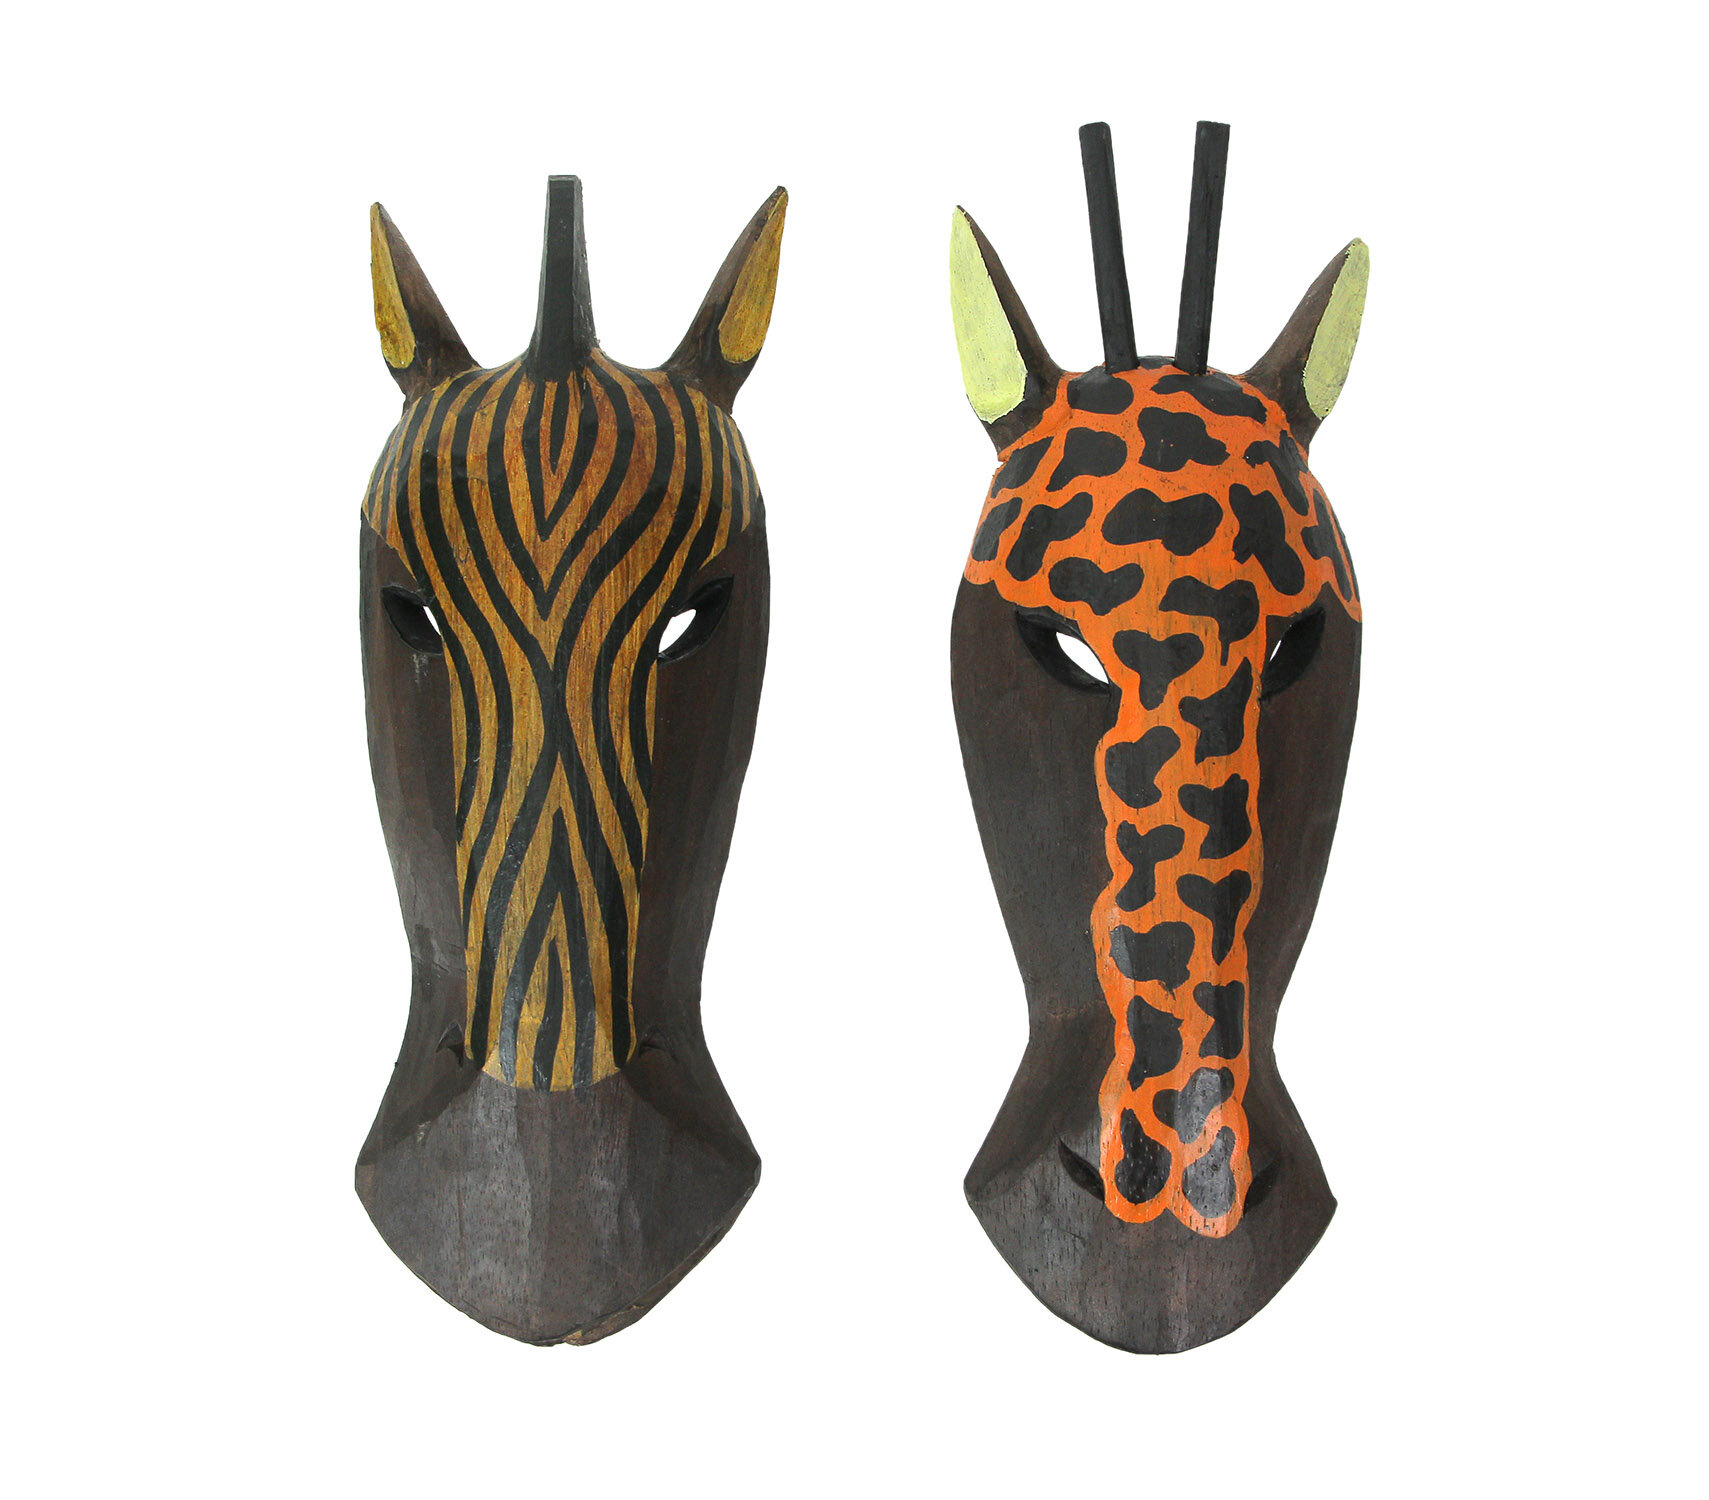 12 Inch, Giraffe ORN Giraffe Zebra Face Mask Wall Hanging Décor Hand Painted Patterns African Safari Style Decorative Accent Contemporary Variation an Awesome Gifting Idea 20 Inch and 12 Inch